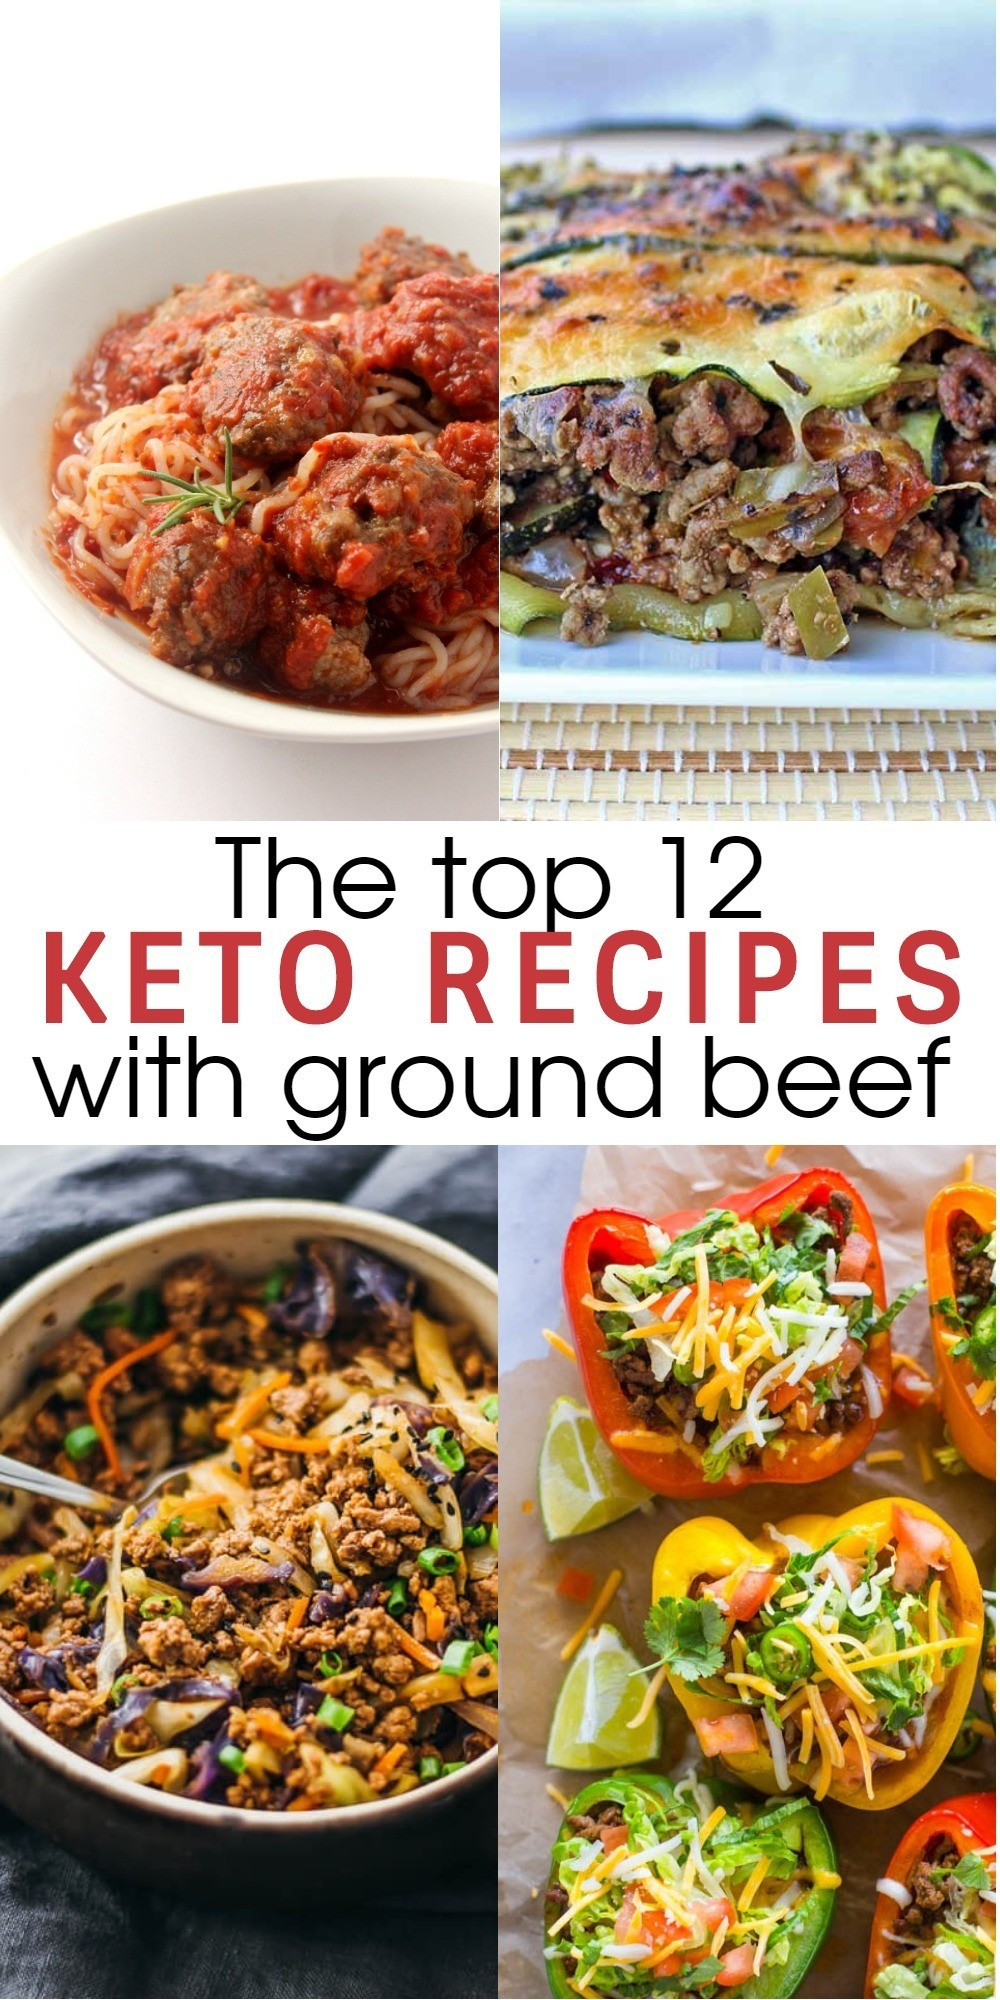 Ground Hamburger Keto
 12 Flavorful and Easy Keto Recipes With Ground Beef To Try